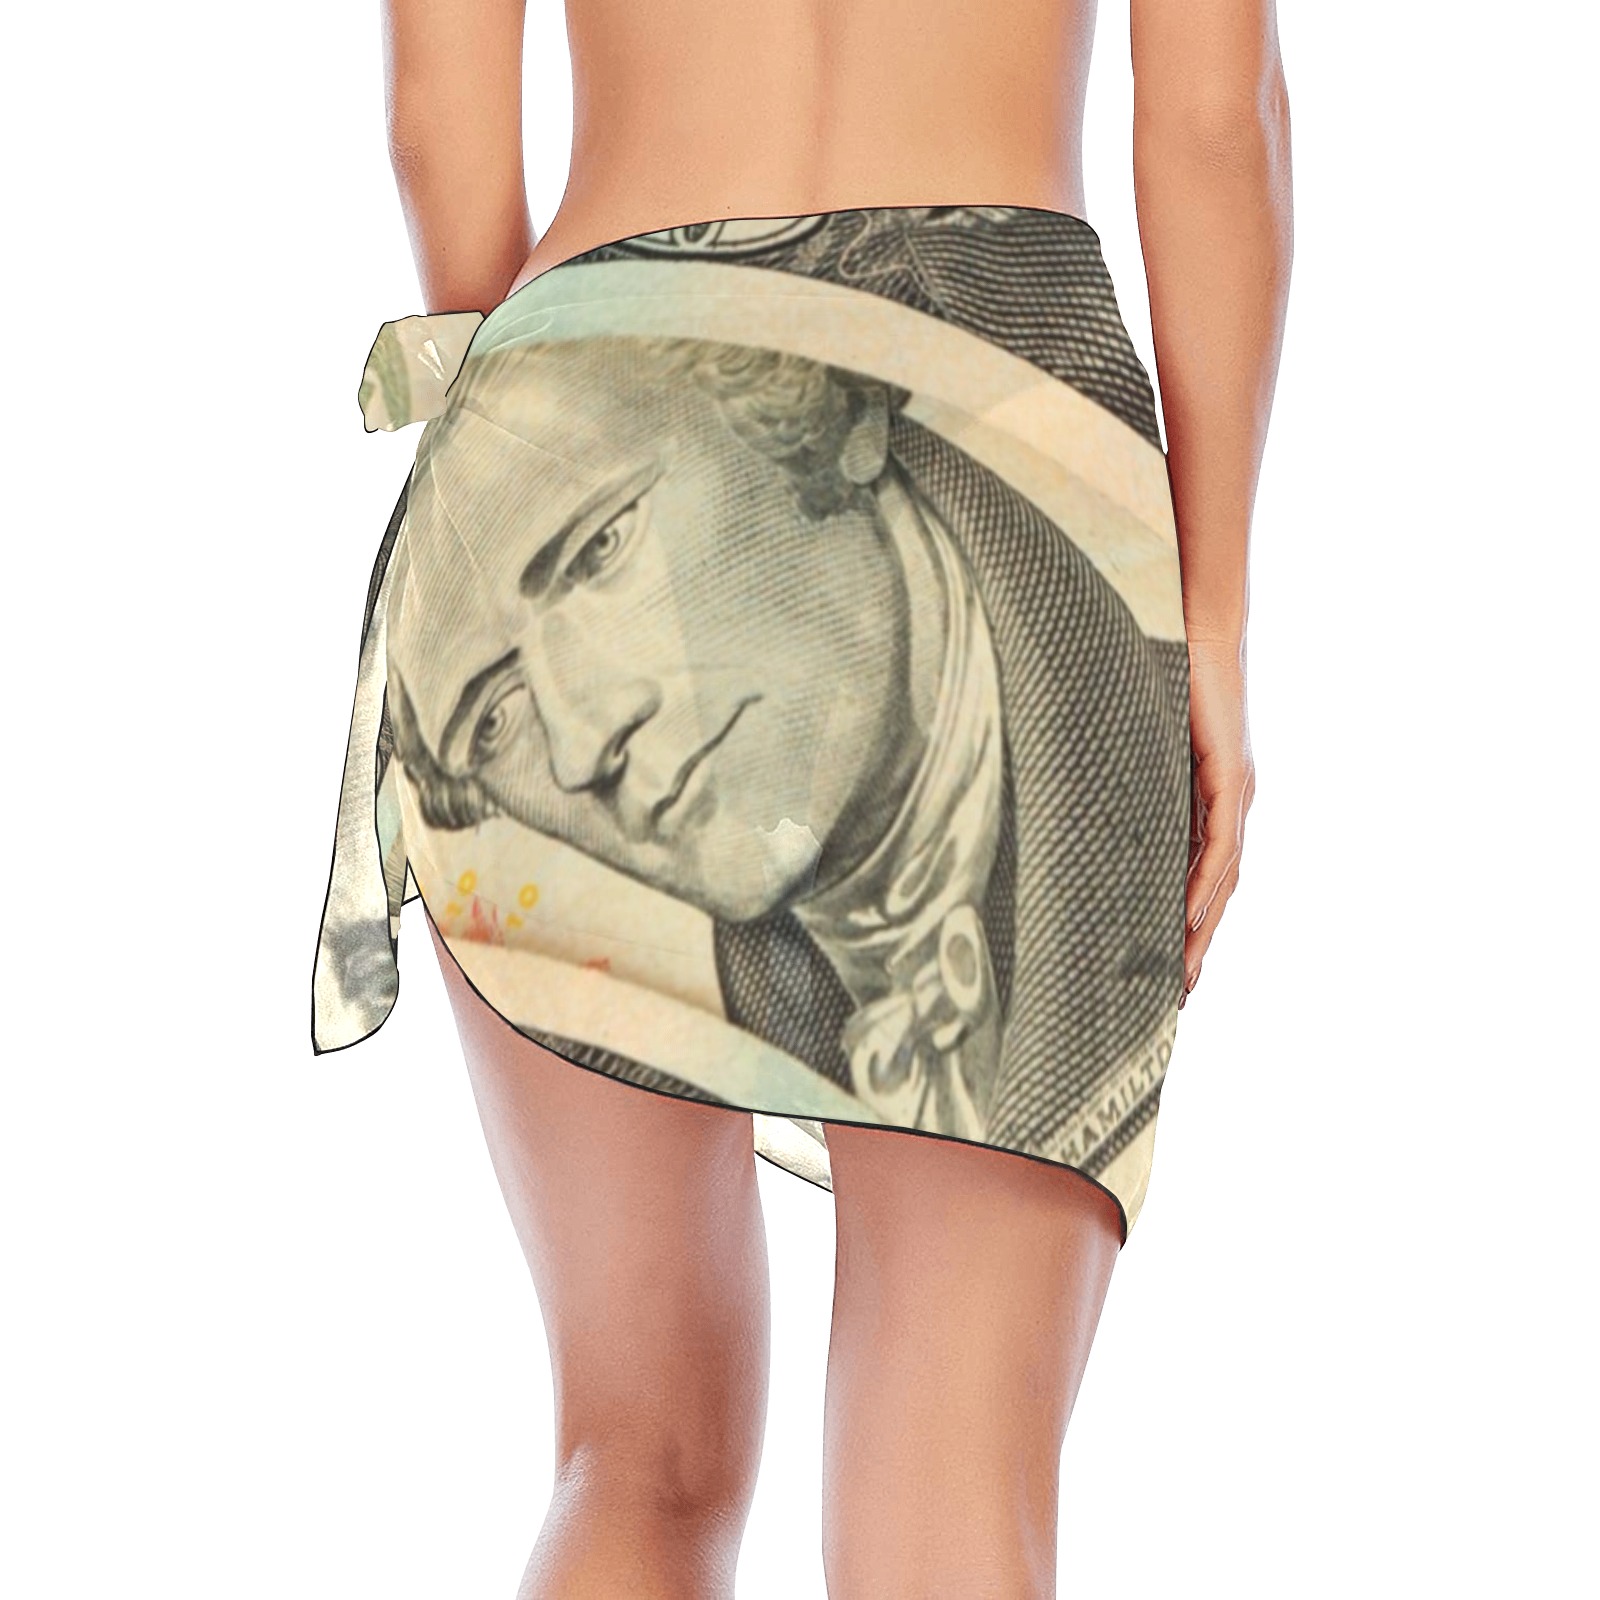 US PAPER CURRENCY Beach Sarong Wrap